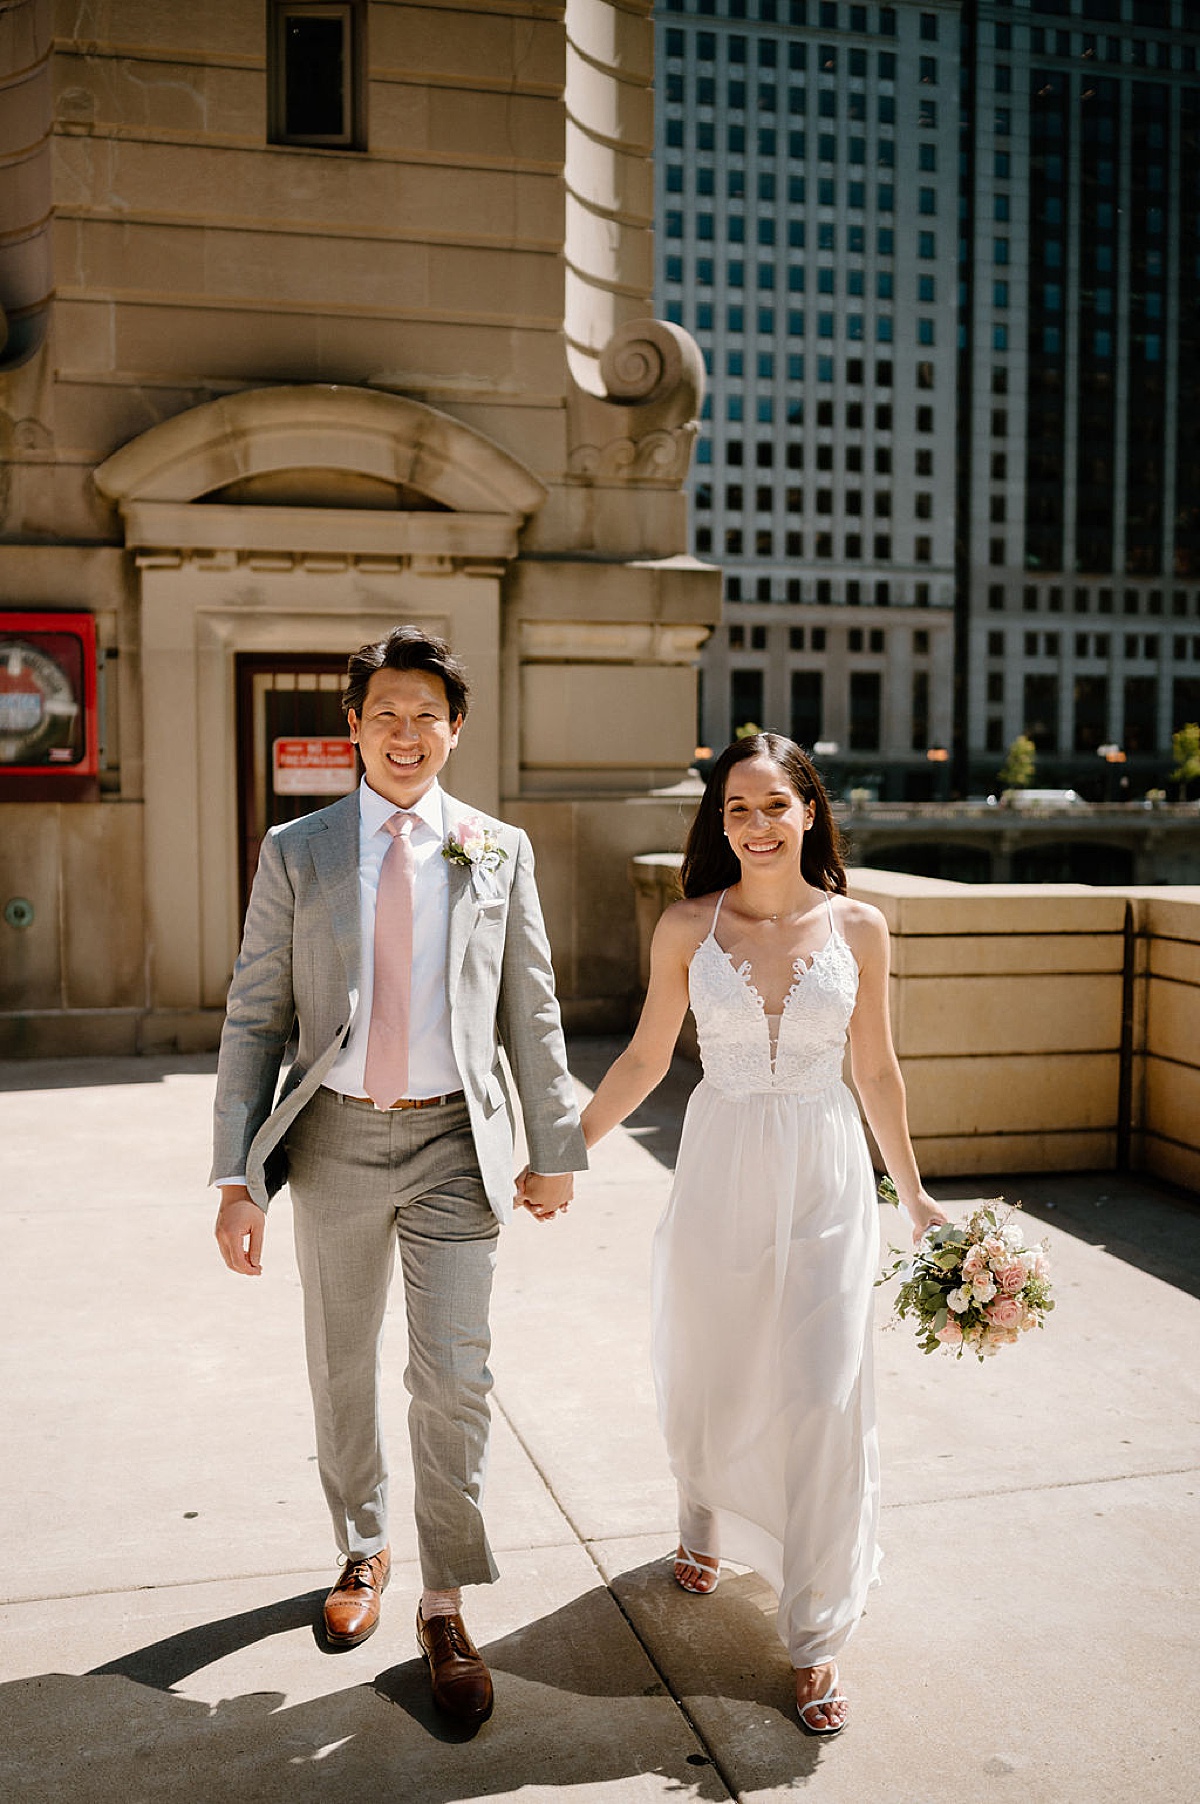 bride in pretty gown and groom in dapper suit walk hand in hand during photos shot by Chicago wedding photographer